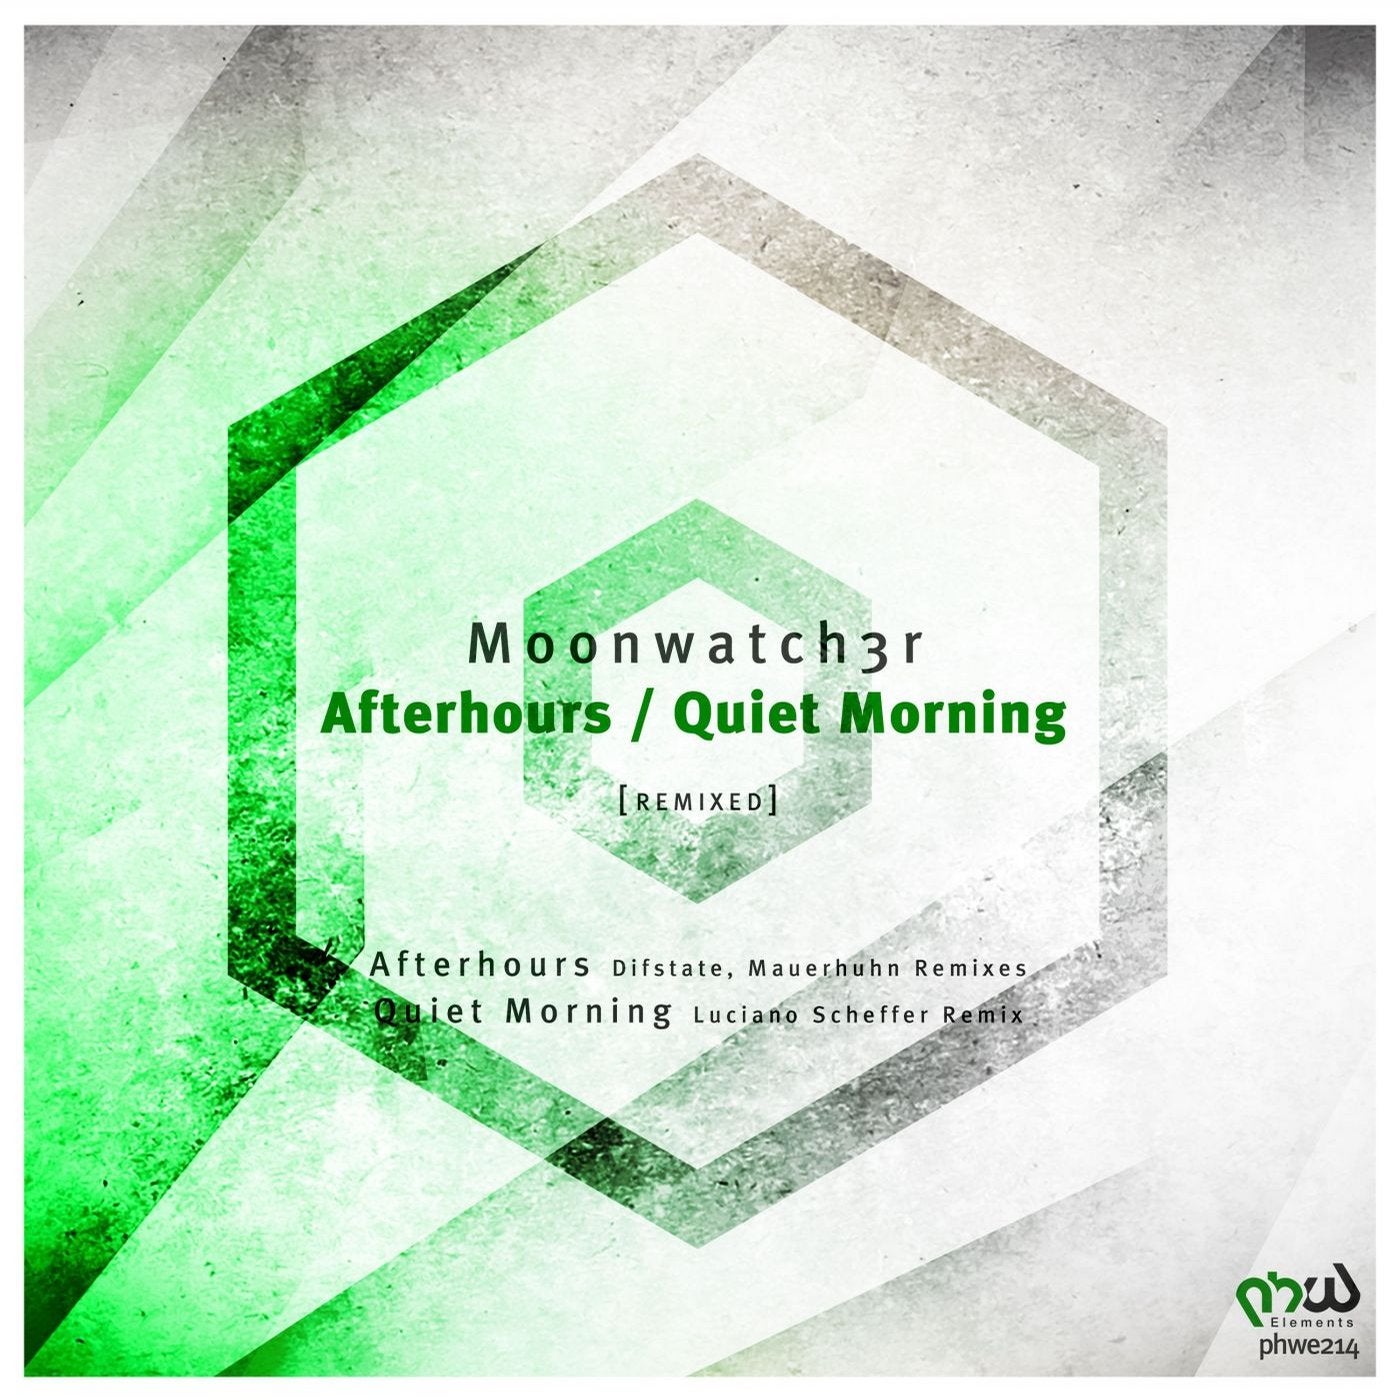 Afterhours / Quiet Morning [REMIXED]